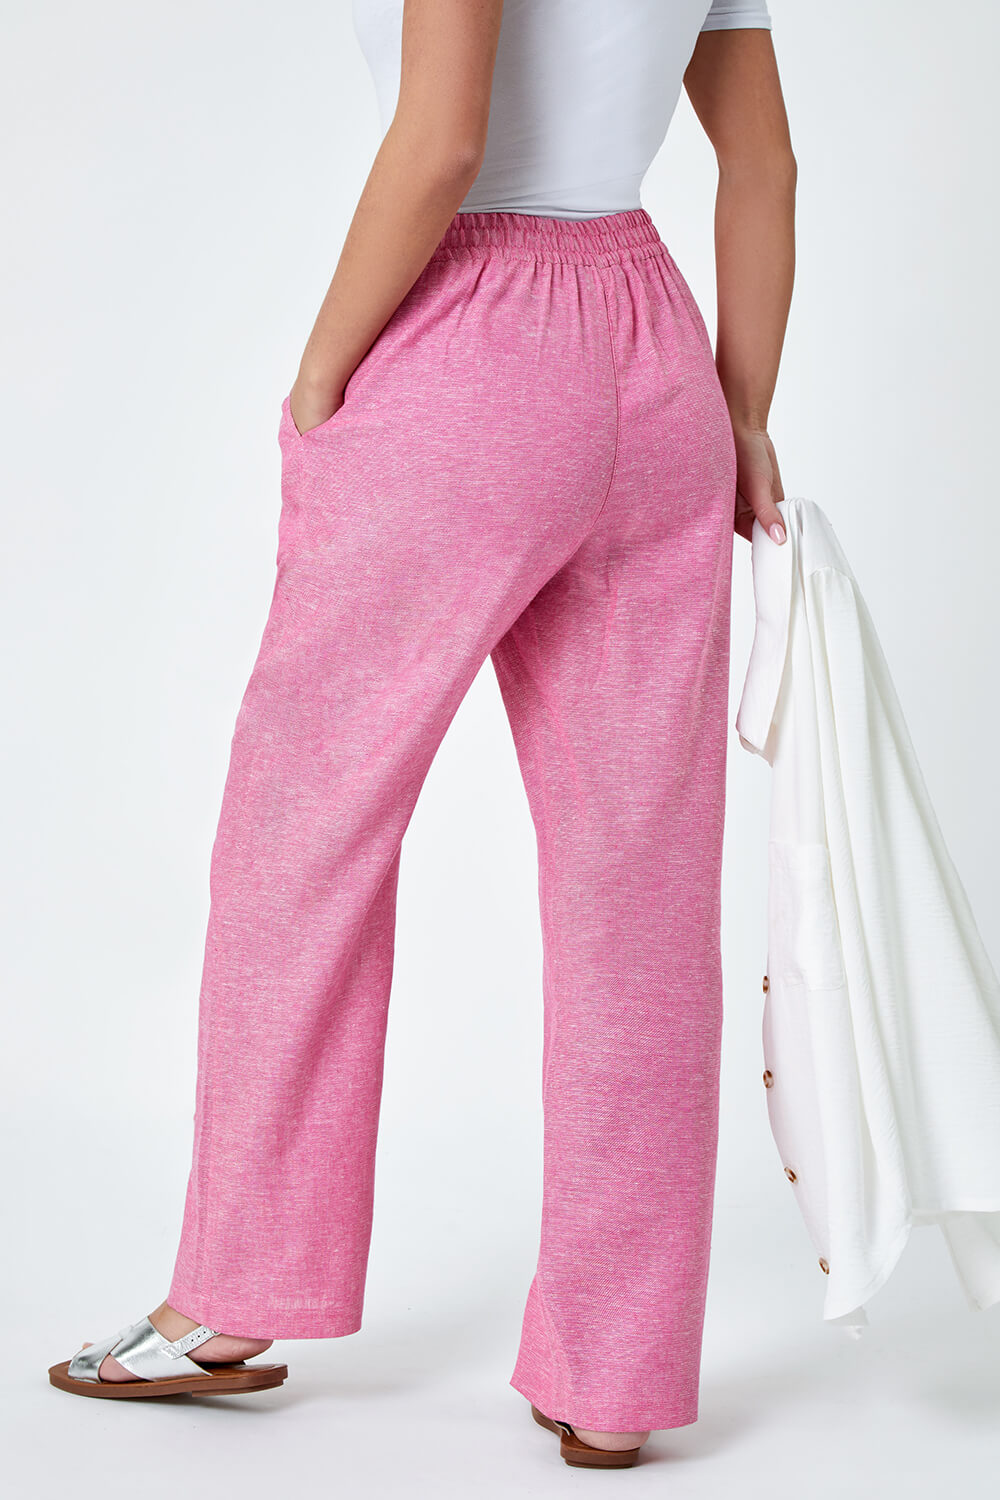 PINK Petite Linen Mix Wide Leg Trousers, Image 3 of 5